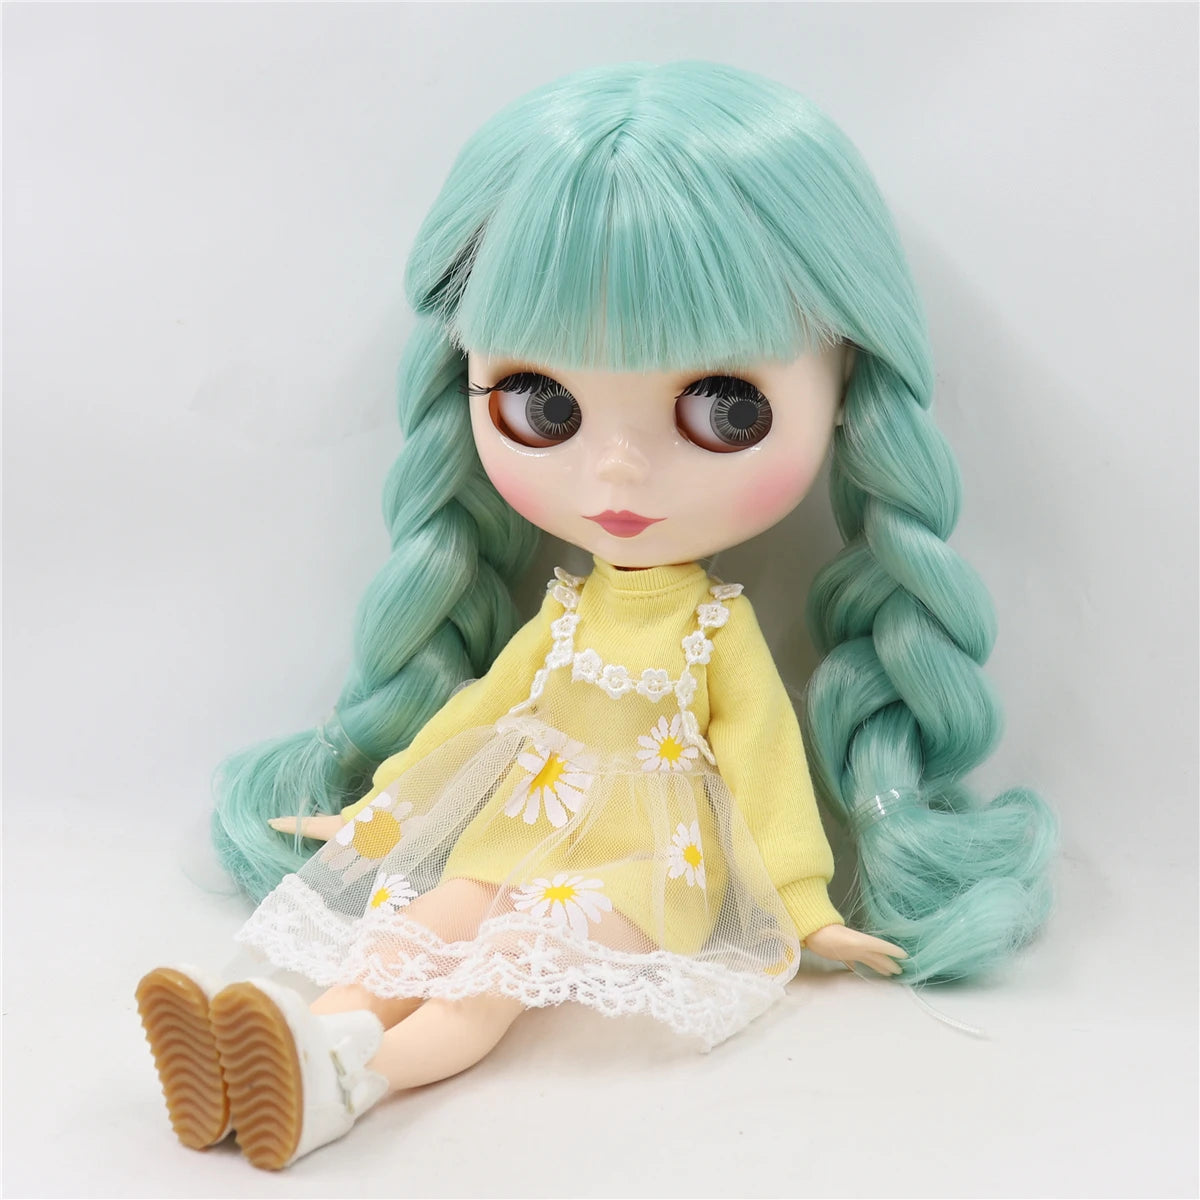 ICY DBS Blyth Doll 1/6 BJD Toy Joint Body Special Offer